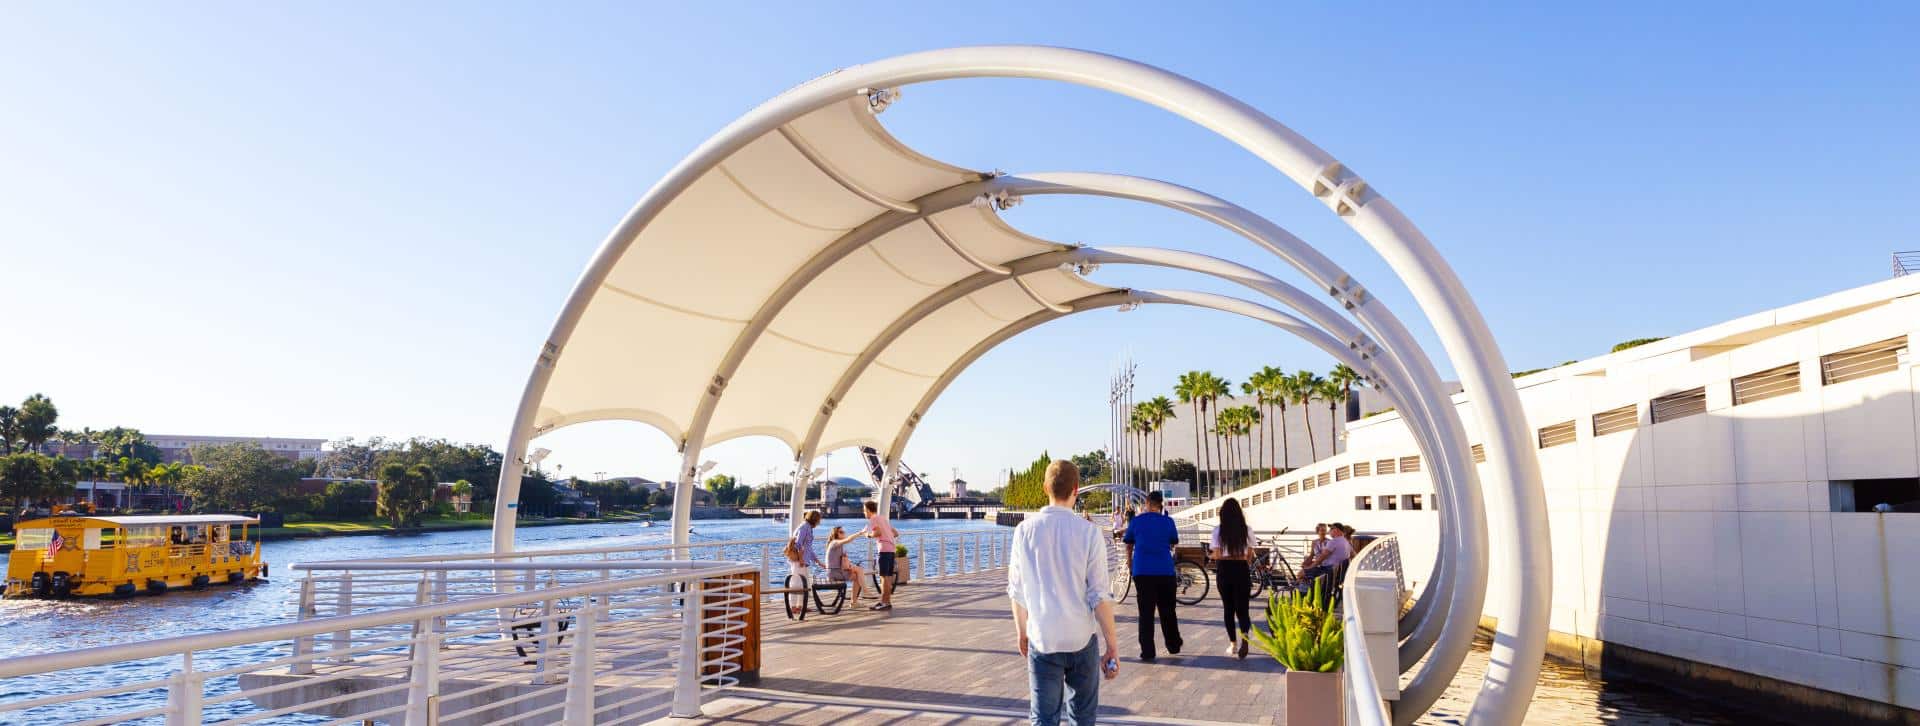 Visit Tampa Bay Launches New Riverwalk Attraction Pass